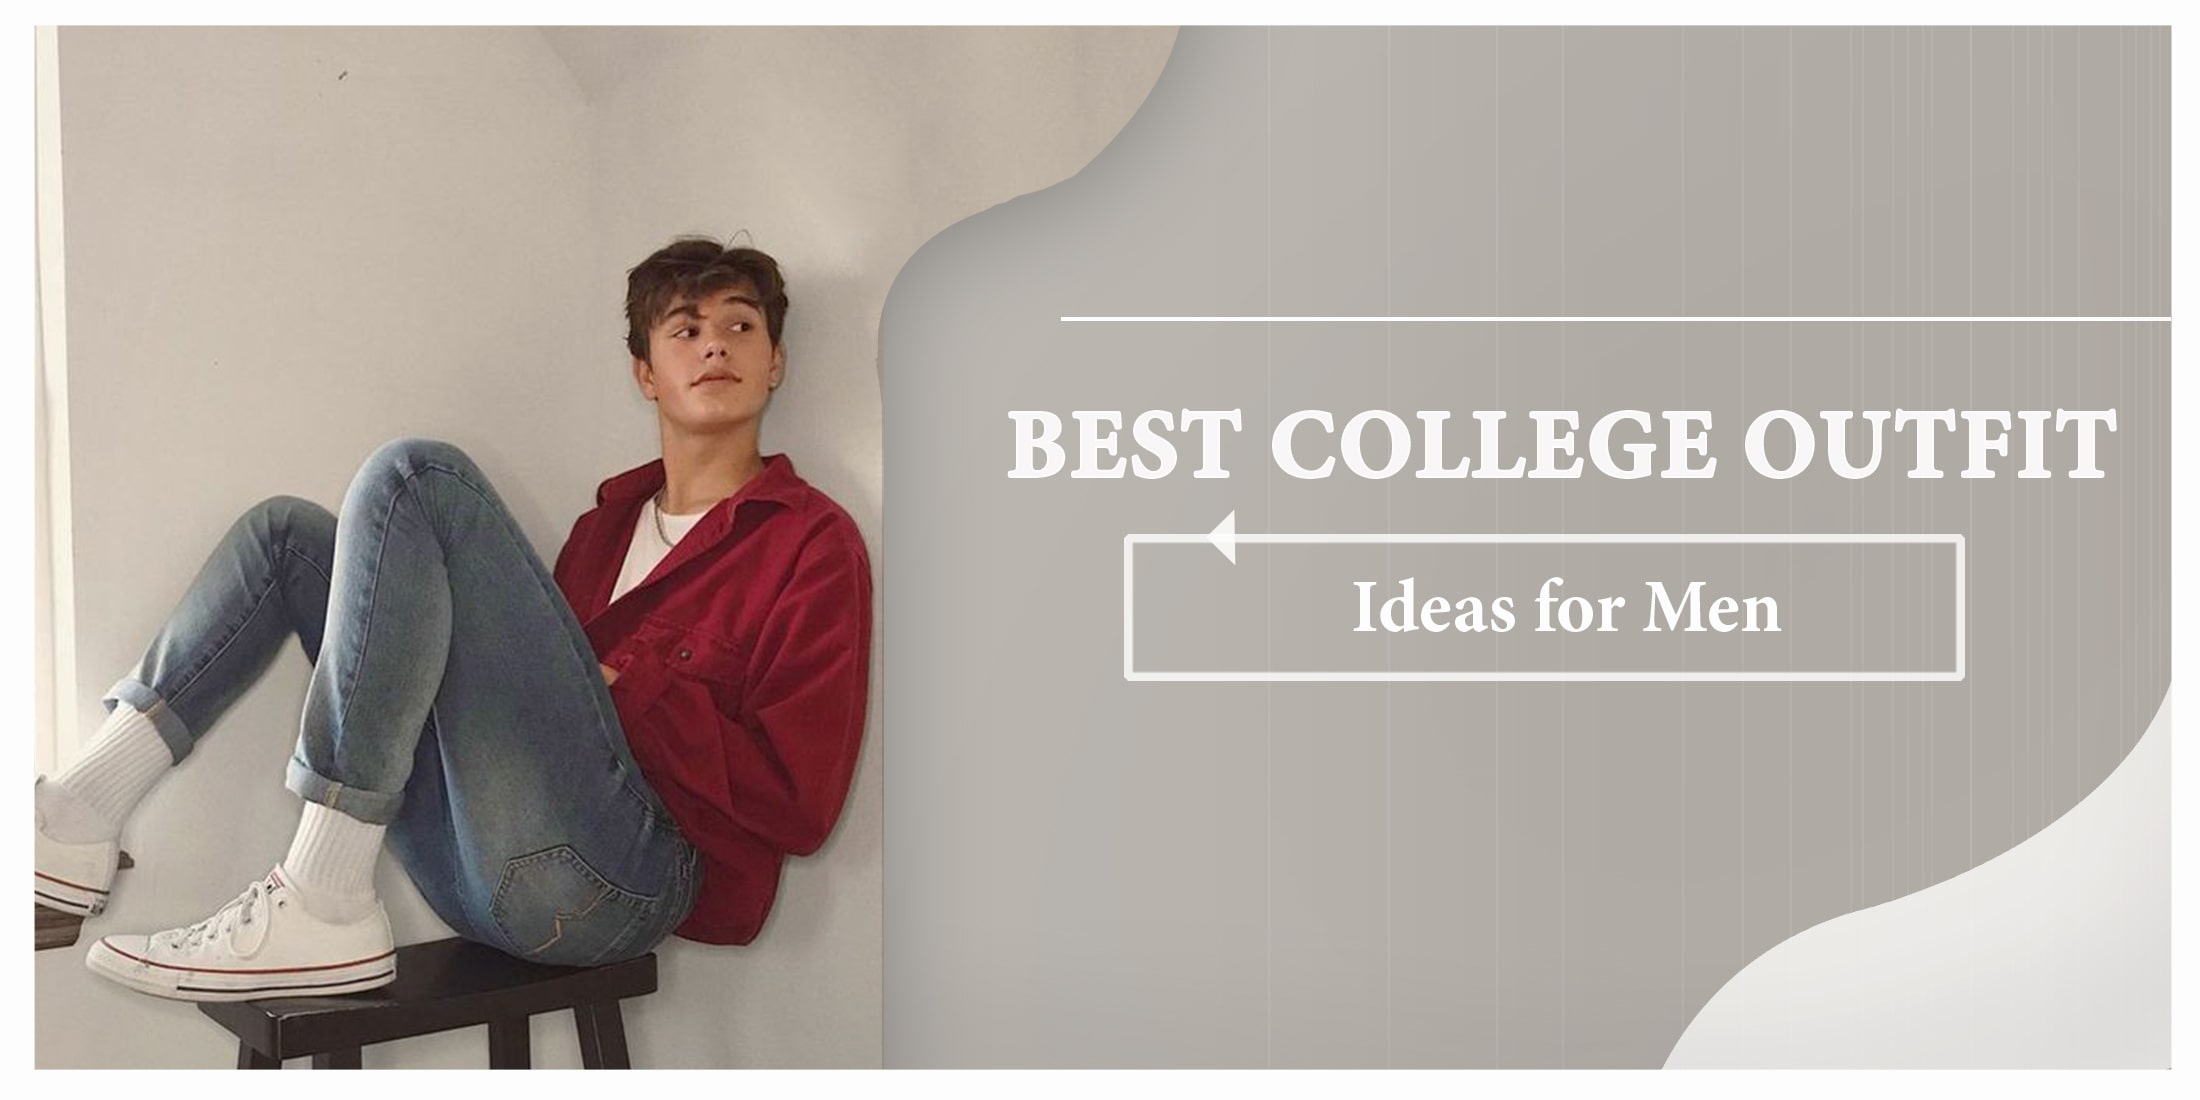 College Outfits for Men